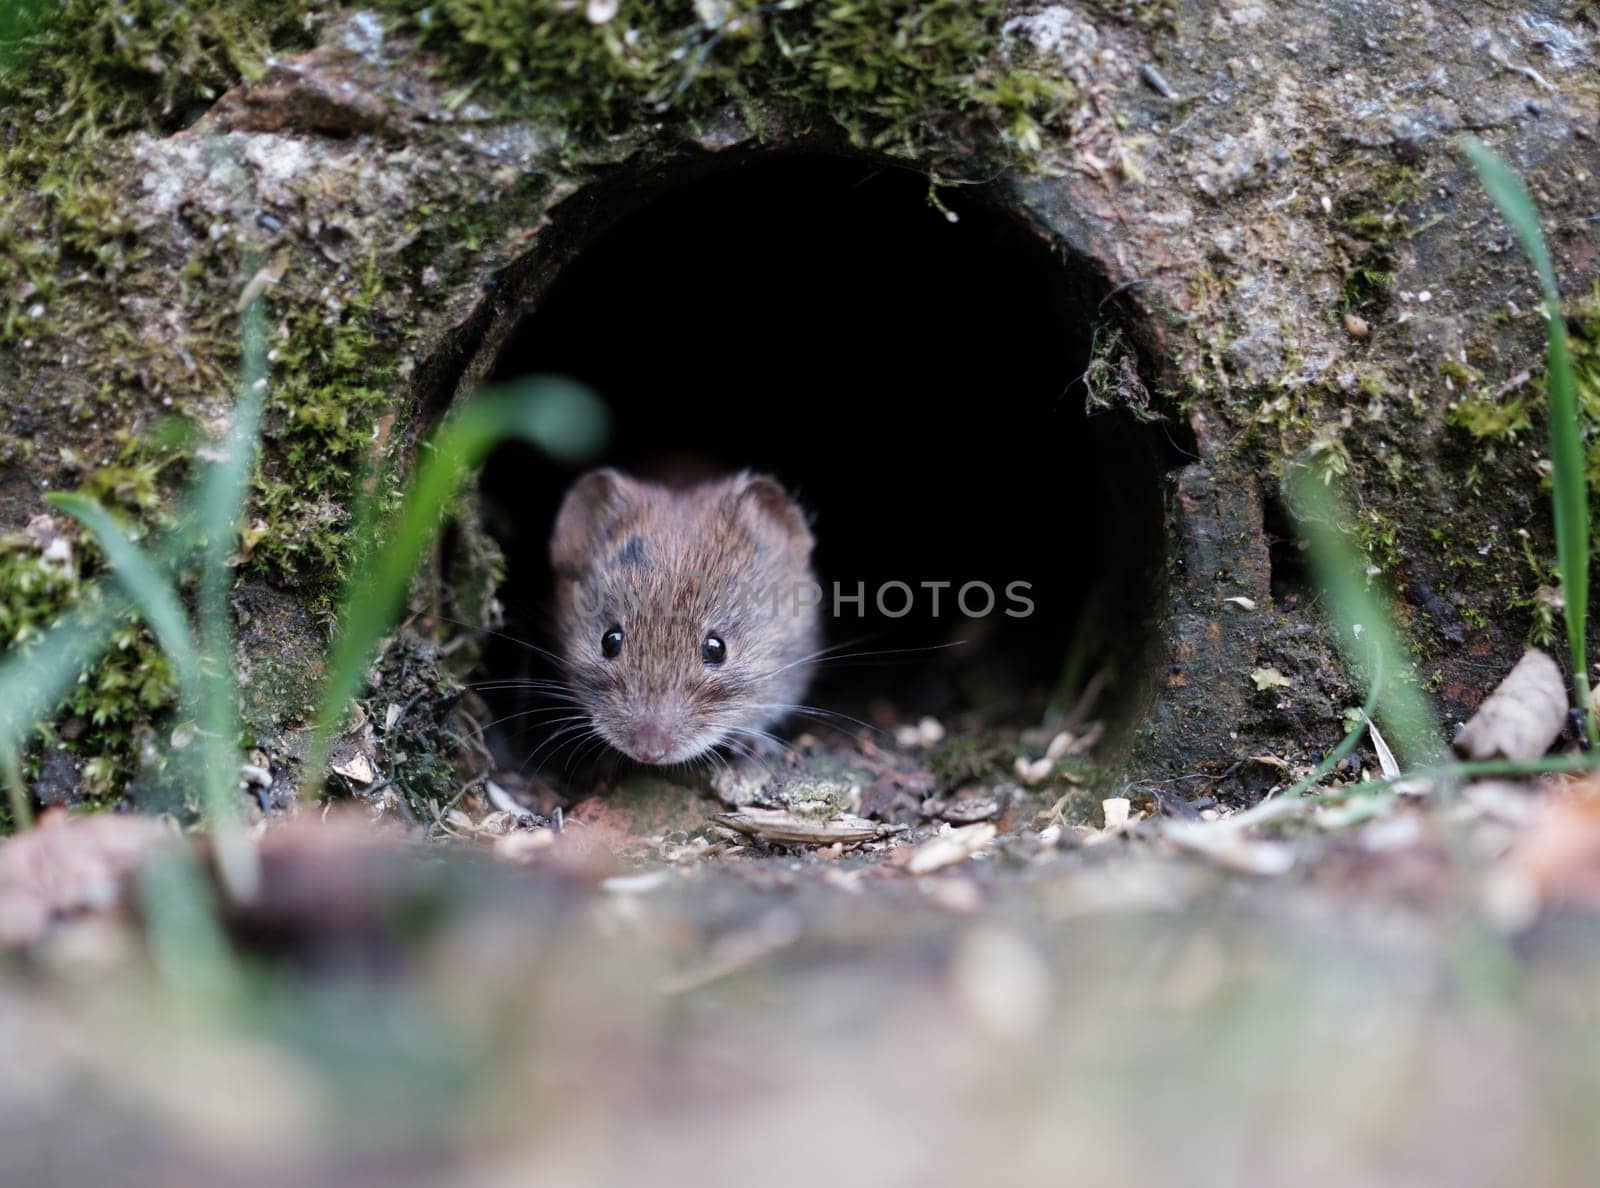 A Cute Vole Peeking Out From A Hole In A Wall